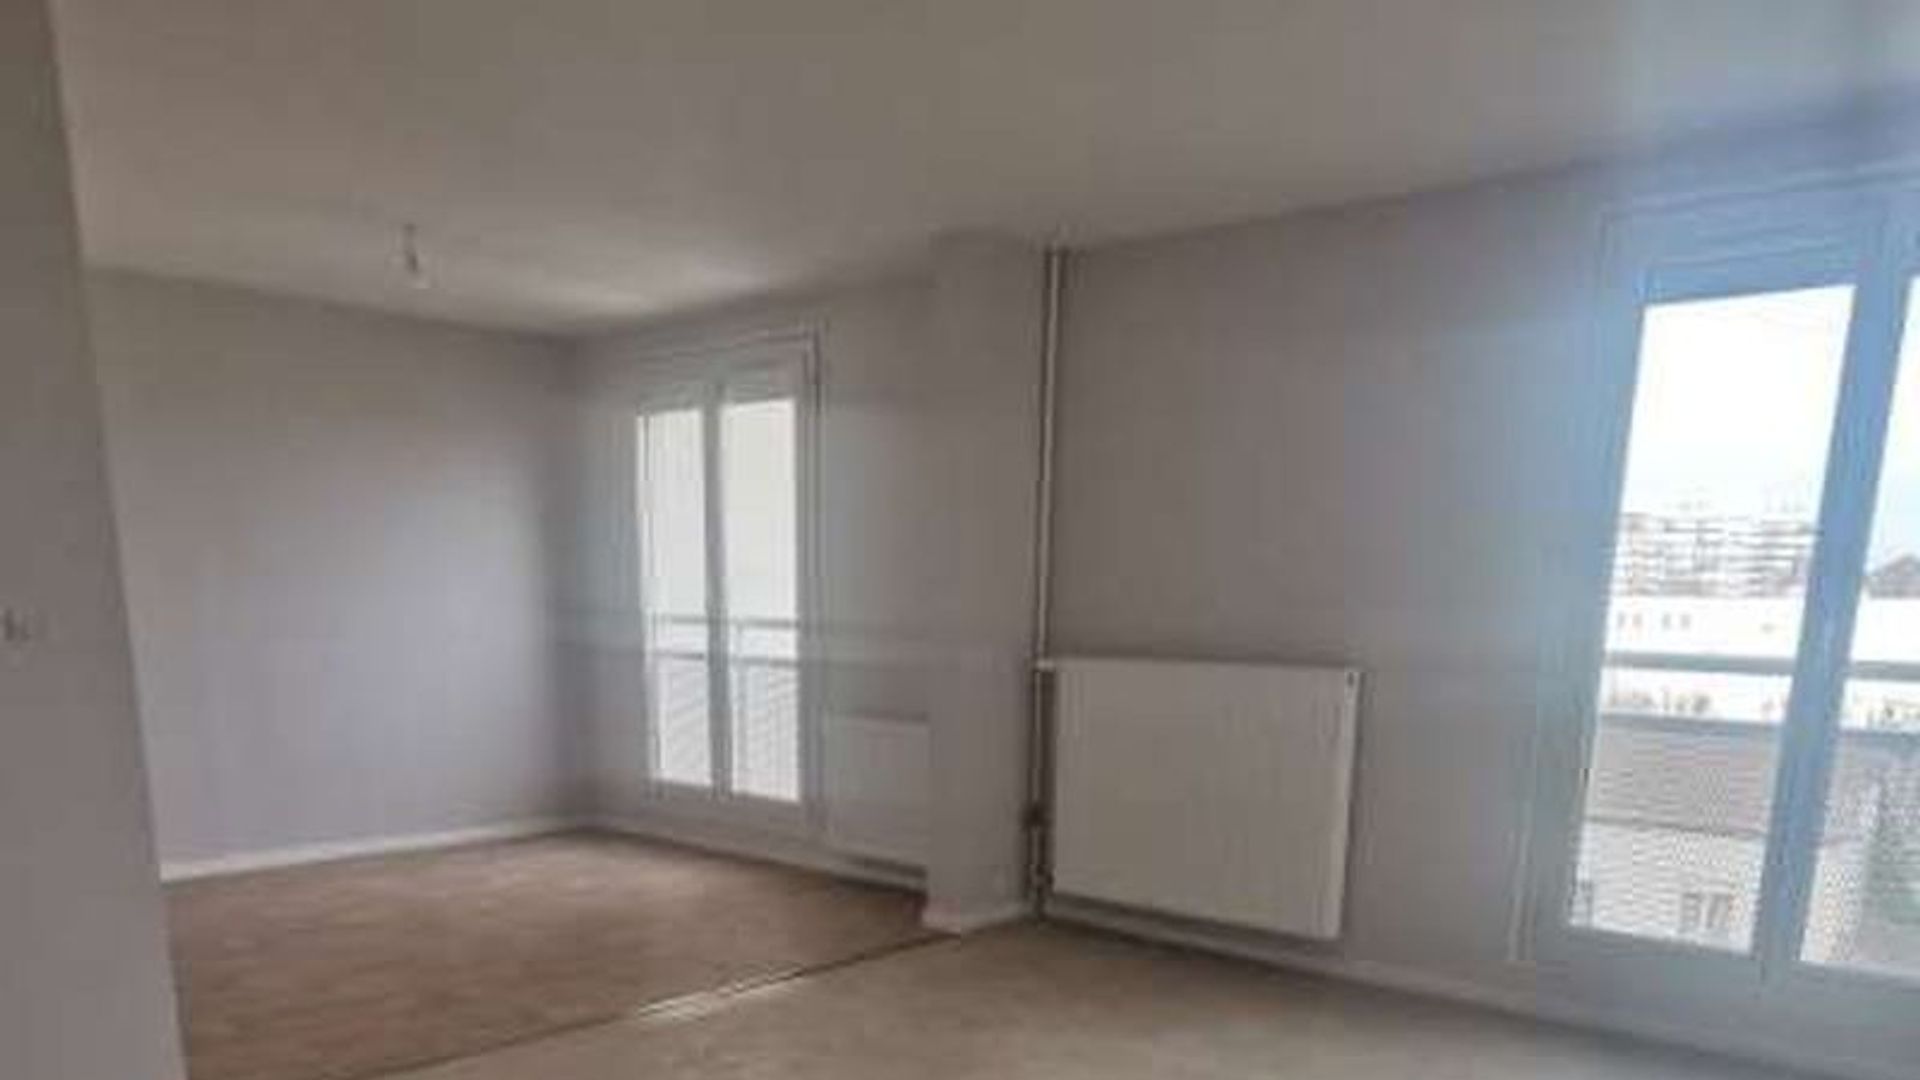 3 bedroom apartment at 124 Boulevard Dauphinot, 51000 Reims, France ...